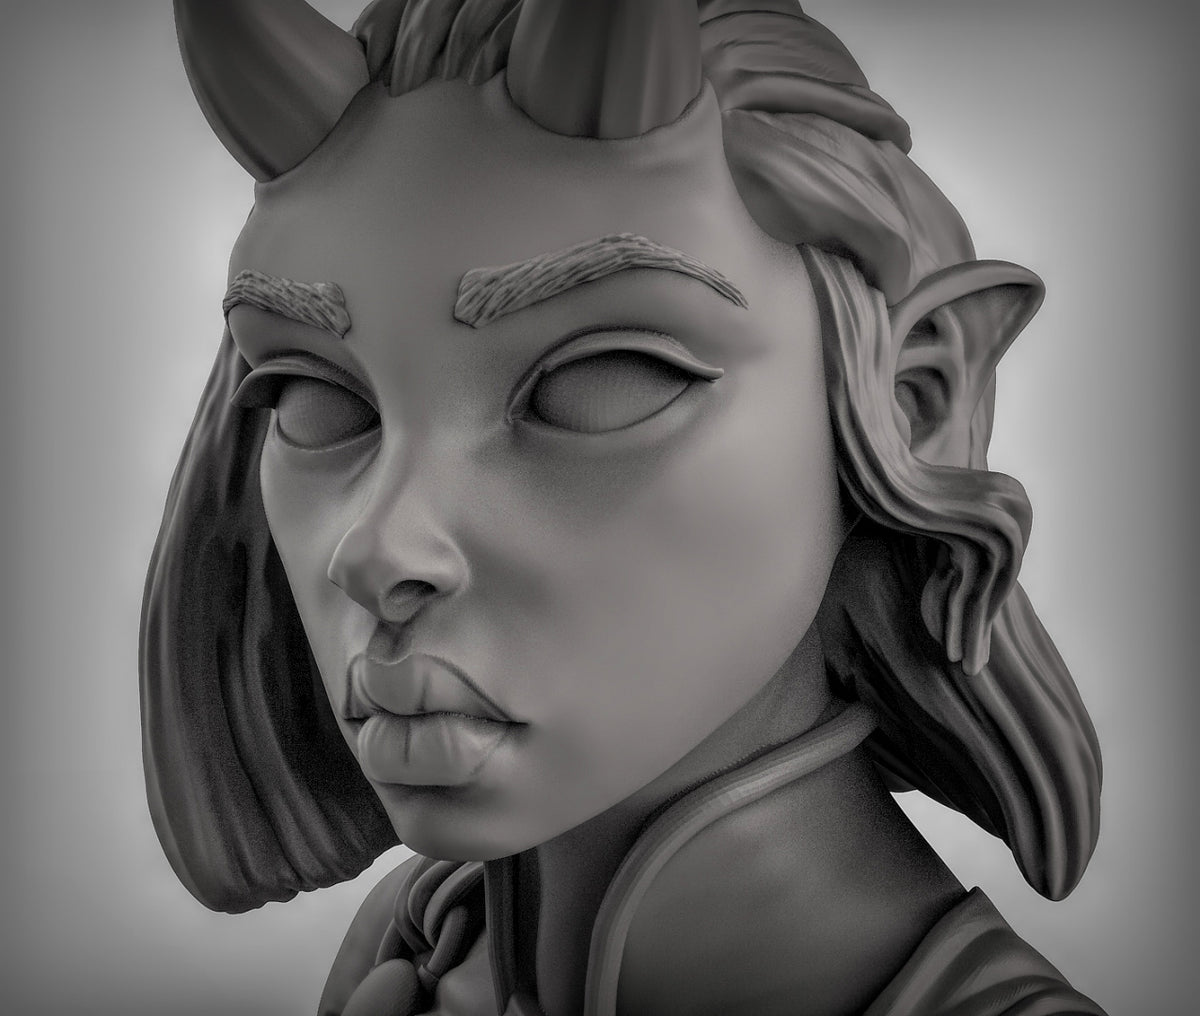 Tiefling Bust Resin Miniature for DnD | Tabletop Gaming